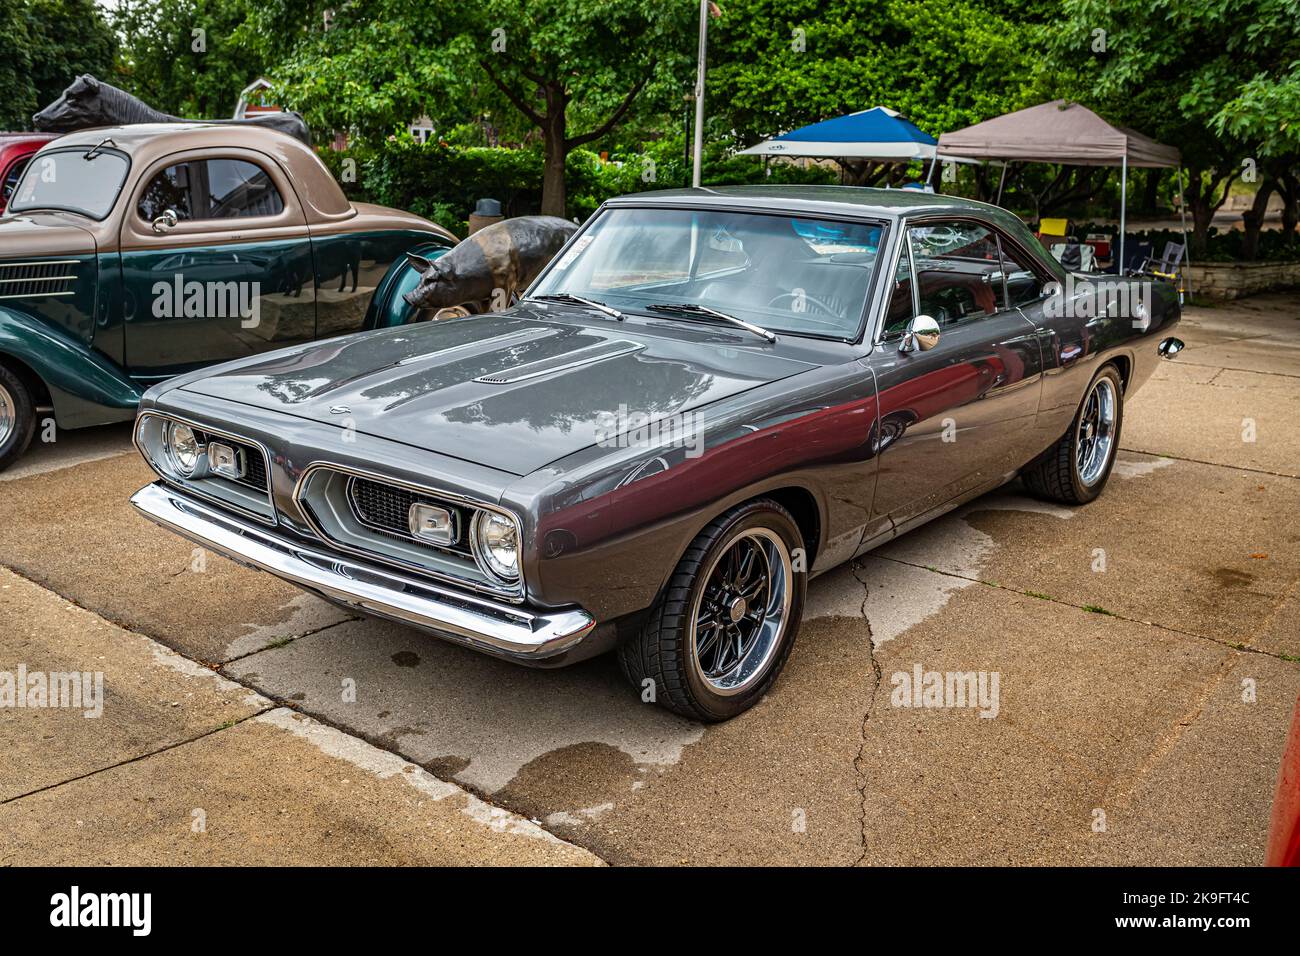 Des Moines, IA - July 01, 2022: High perspective front corner view of a 1967 Plymouth Barracuda 2 Door Hardtop at a local car show. Stock Photo